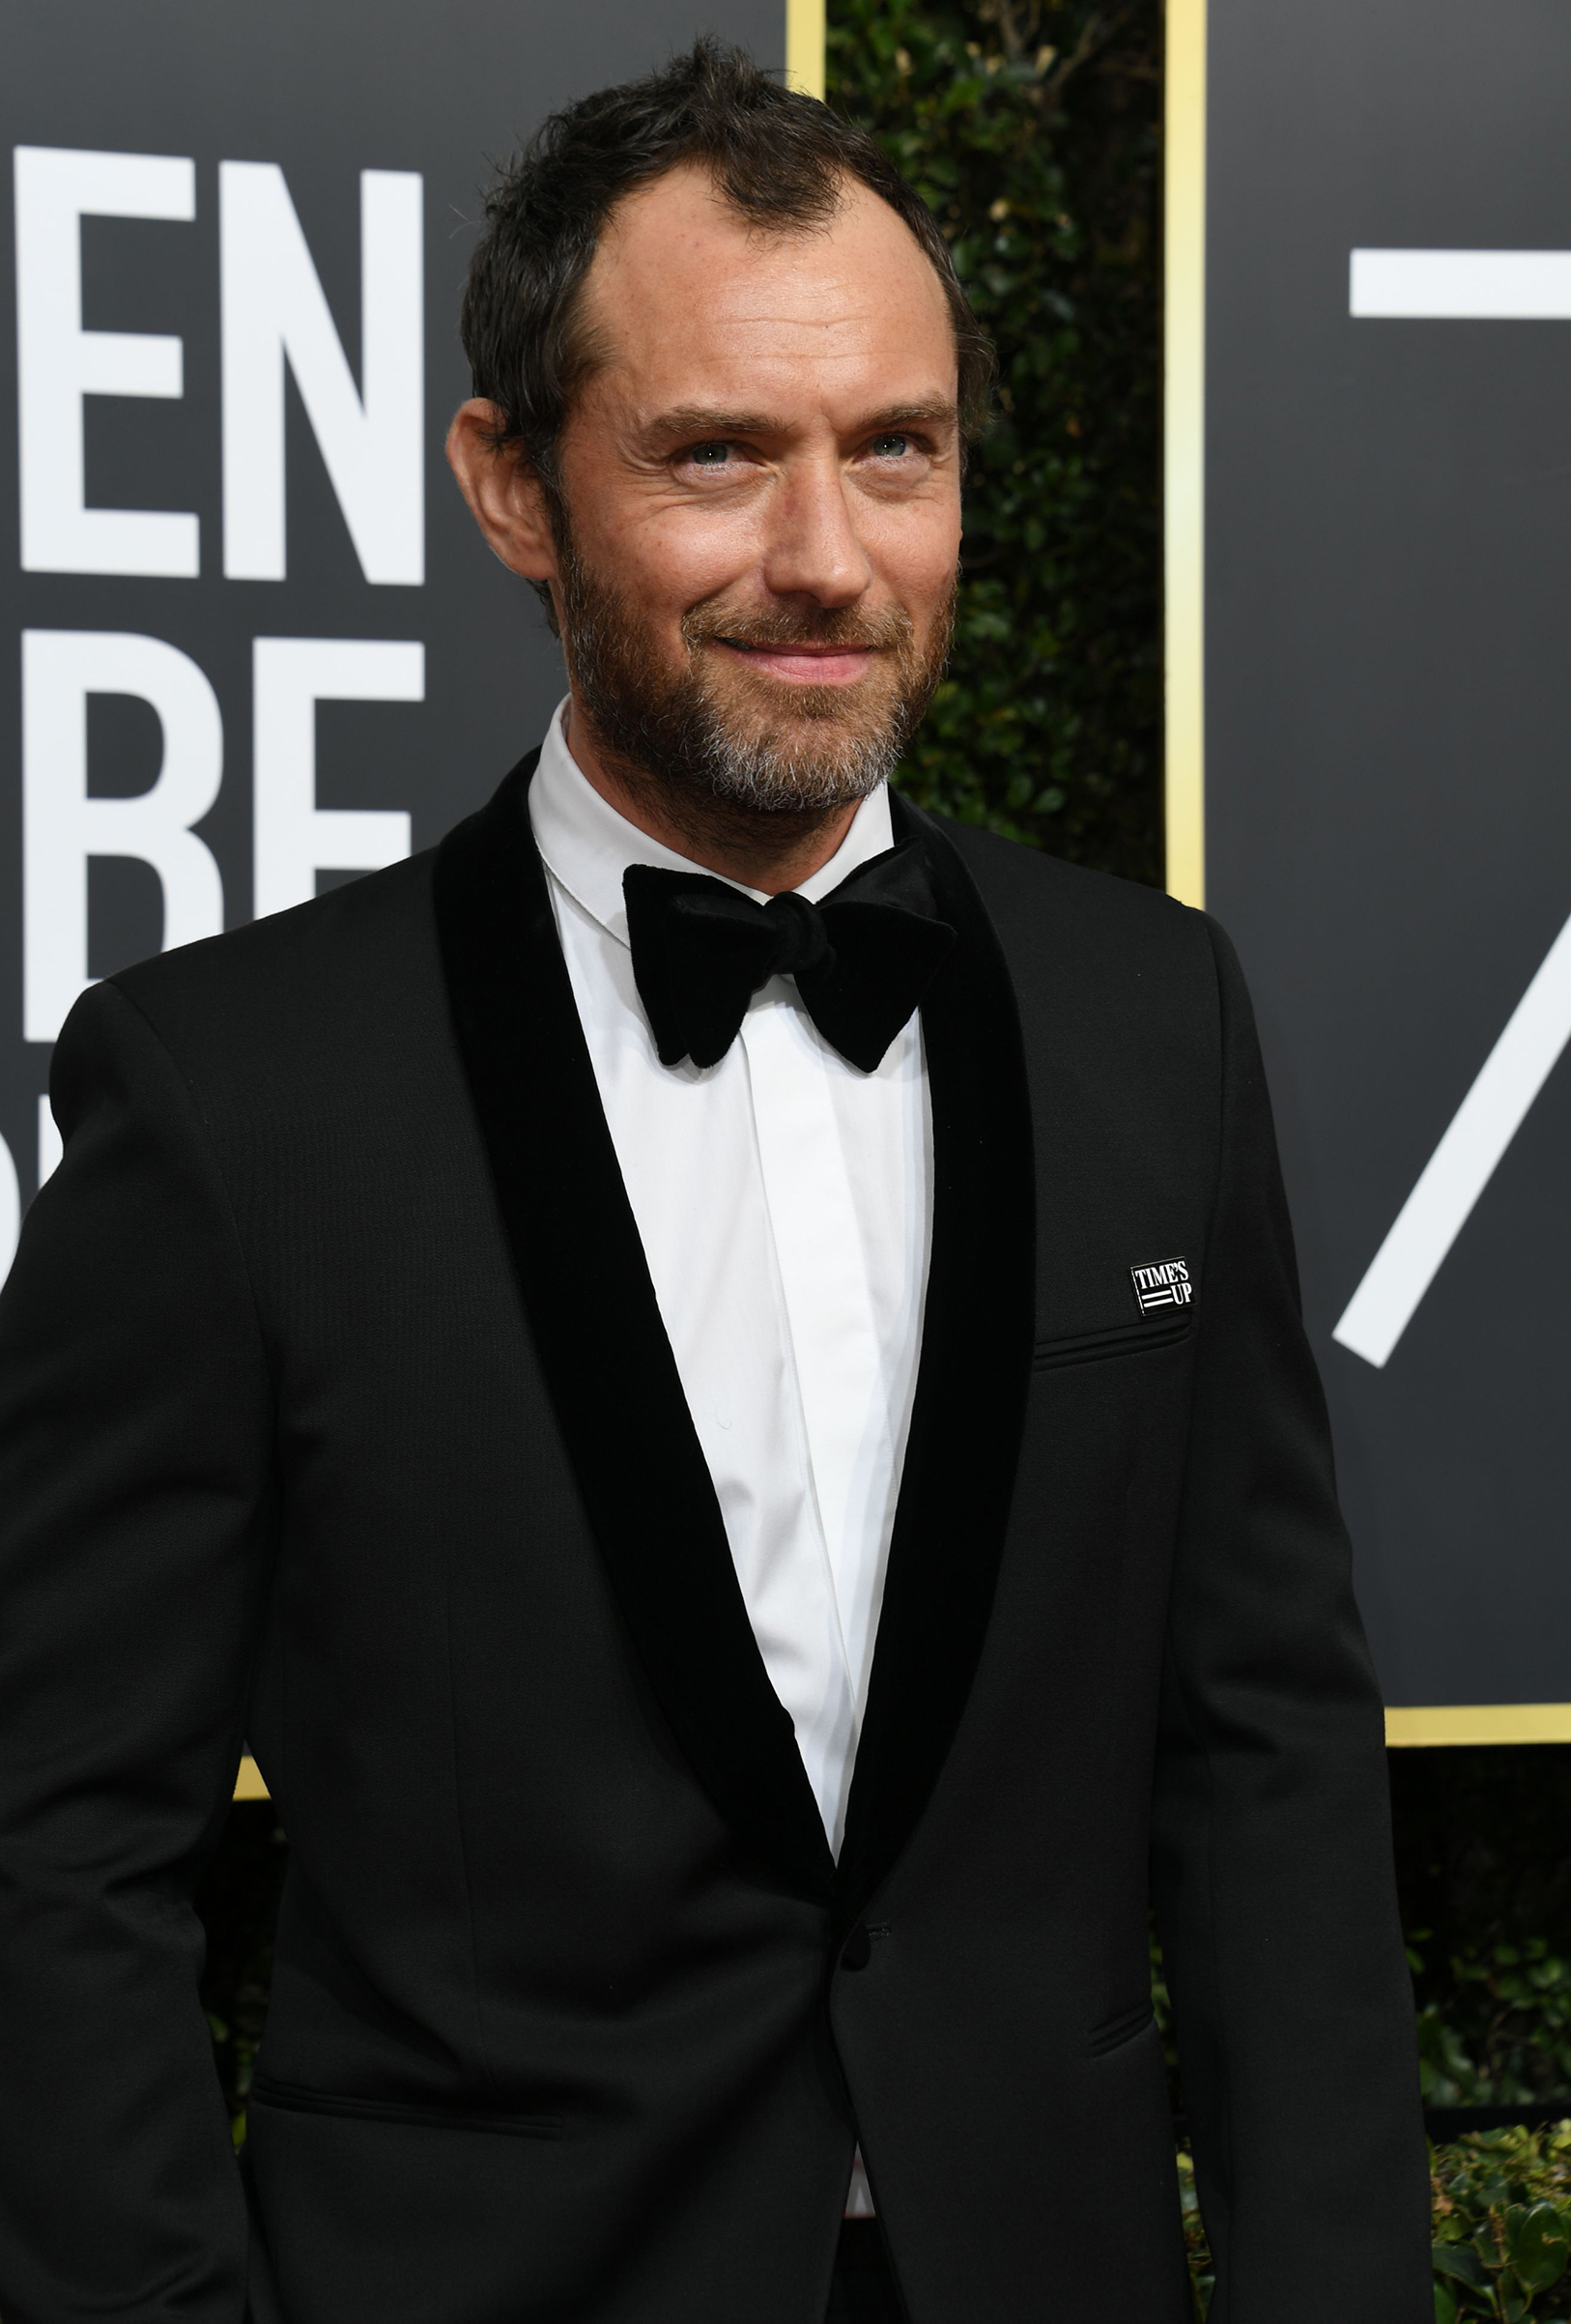 Actor Jude Law arrives for the 75th Golden Globe Awards on January 7, 2018, in Beverly Hills, California. (Valerie Macon—AFP/Getty Images)